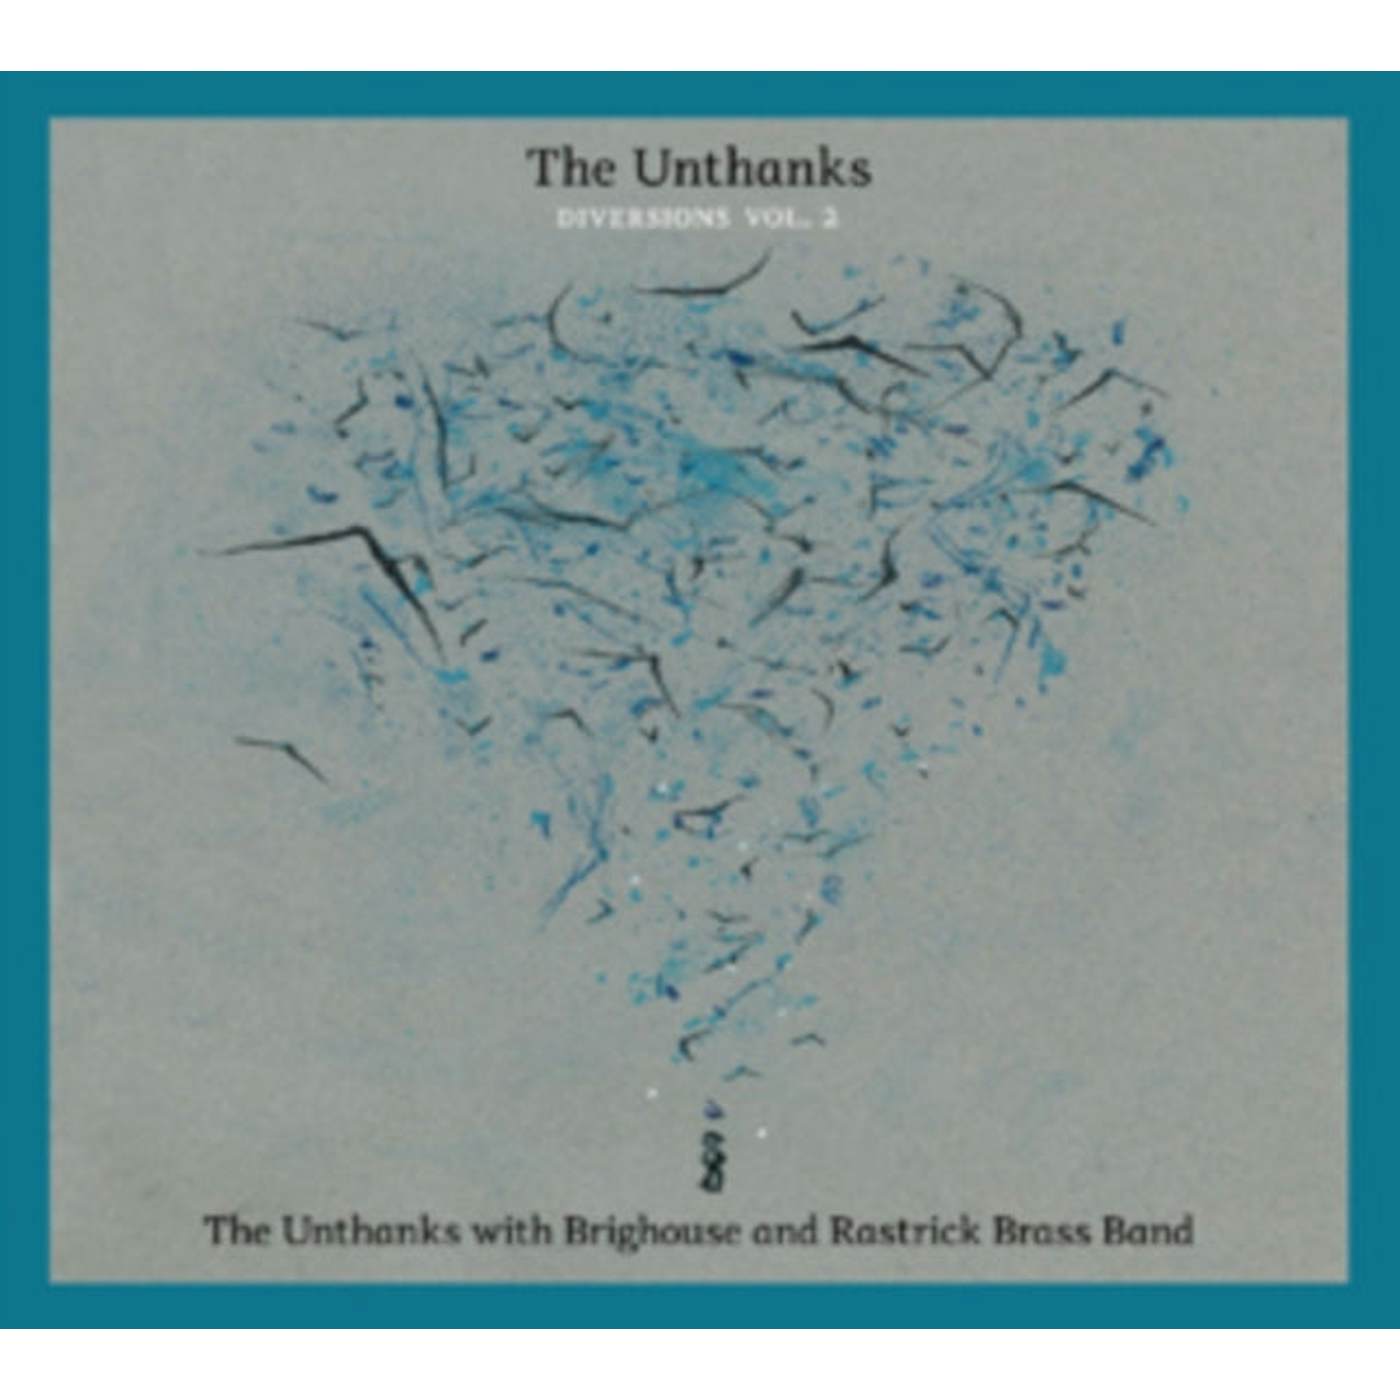 The Unthanks CD - Diversions Vol.2: The Unthanks With Brighouse And Rastrick Brass Band